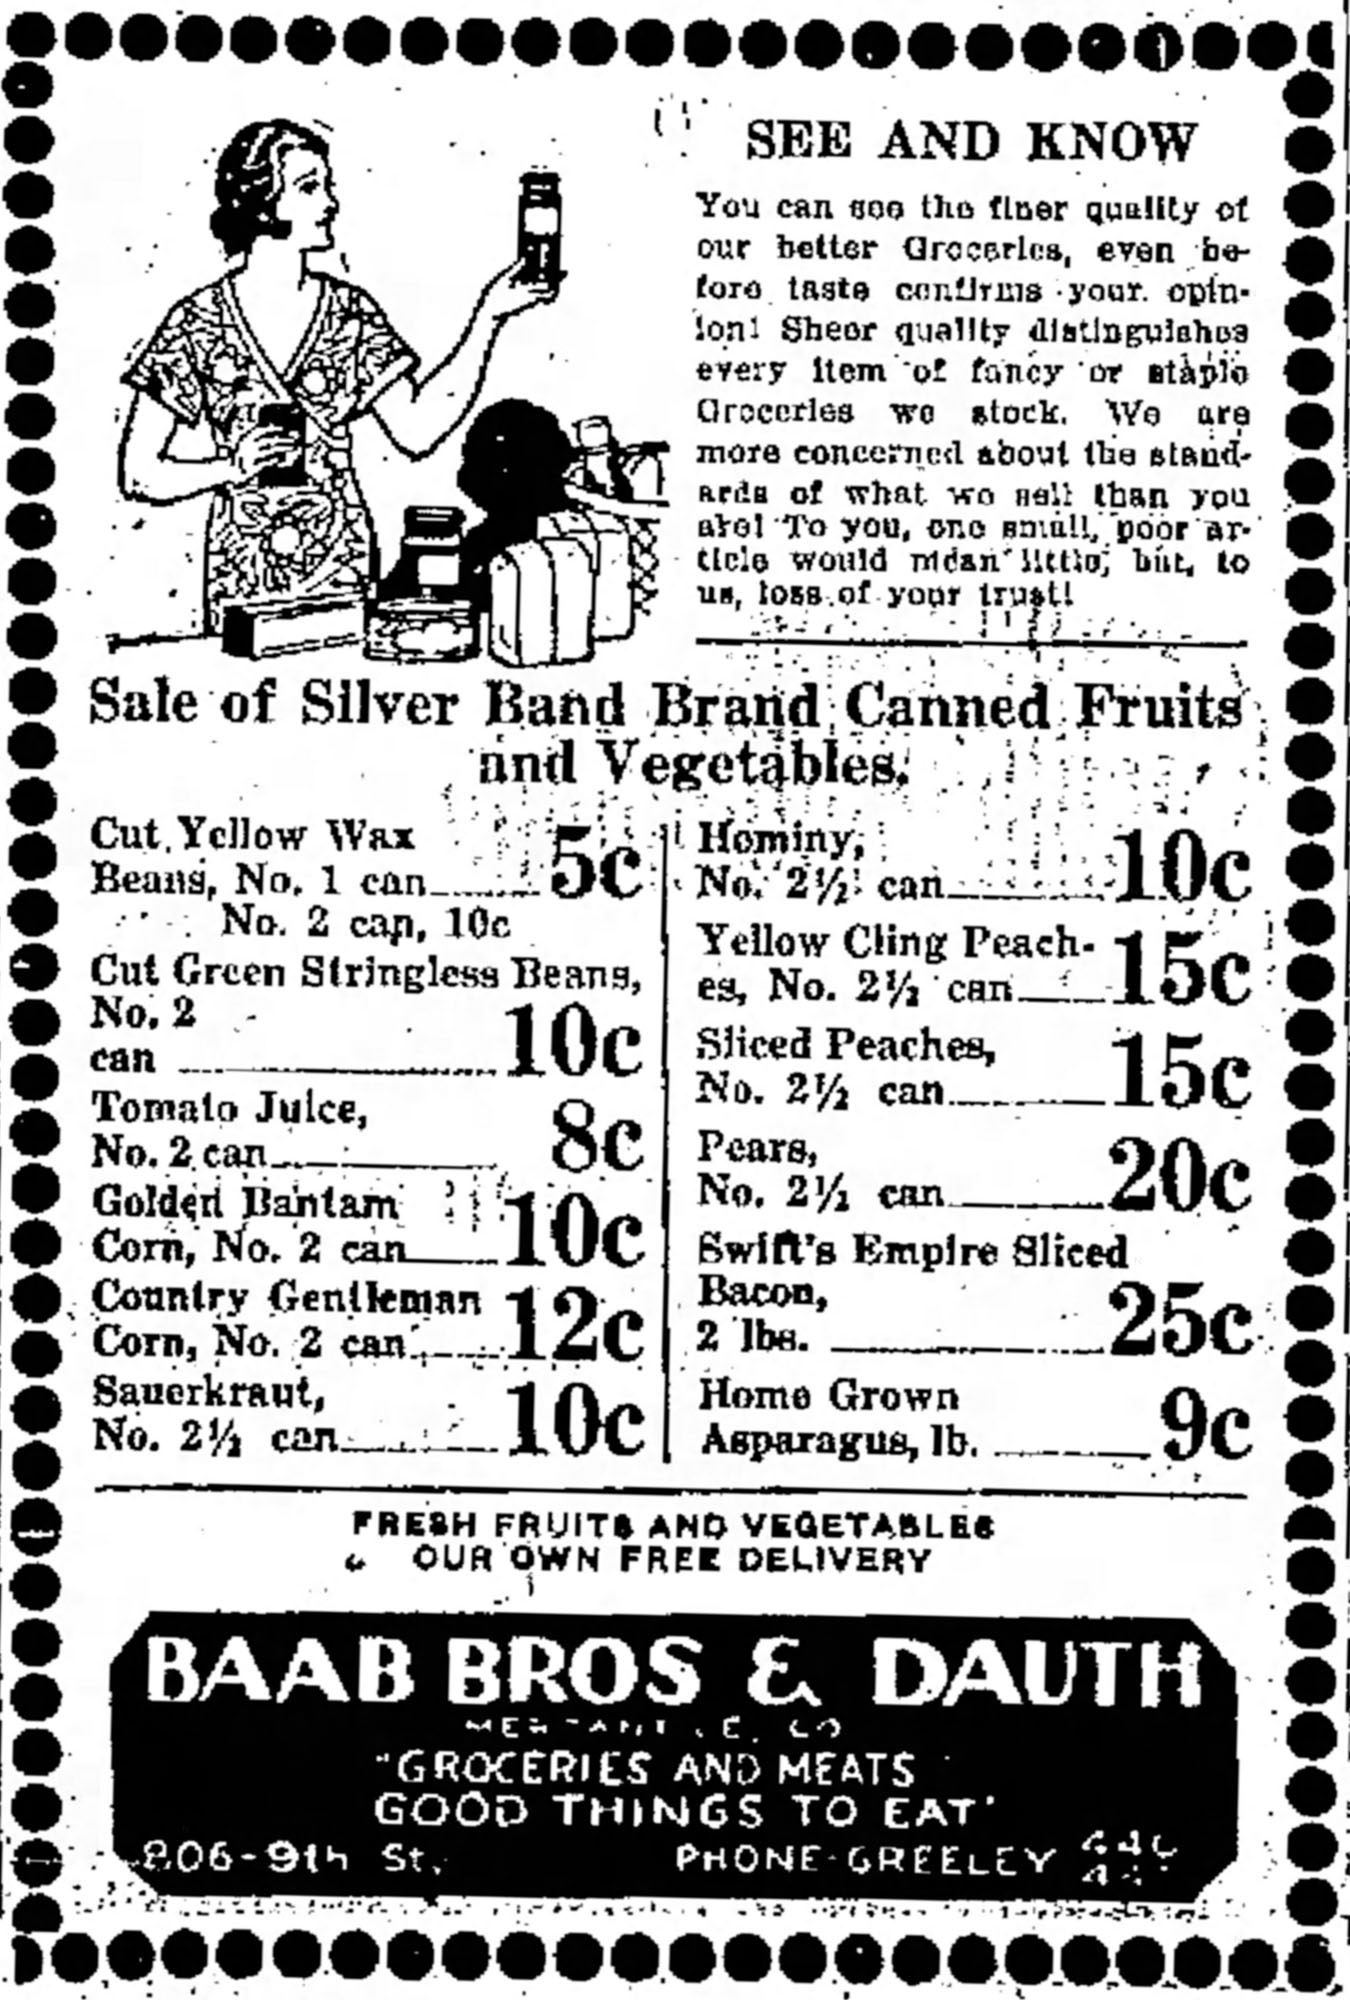 Dauth Family Archive - 1933-04-28 - Greeley Daily Tribune - Baab Bros and Dauth Advertisement